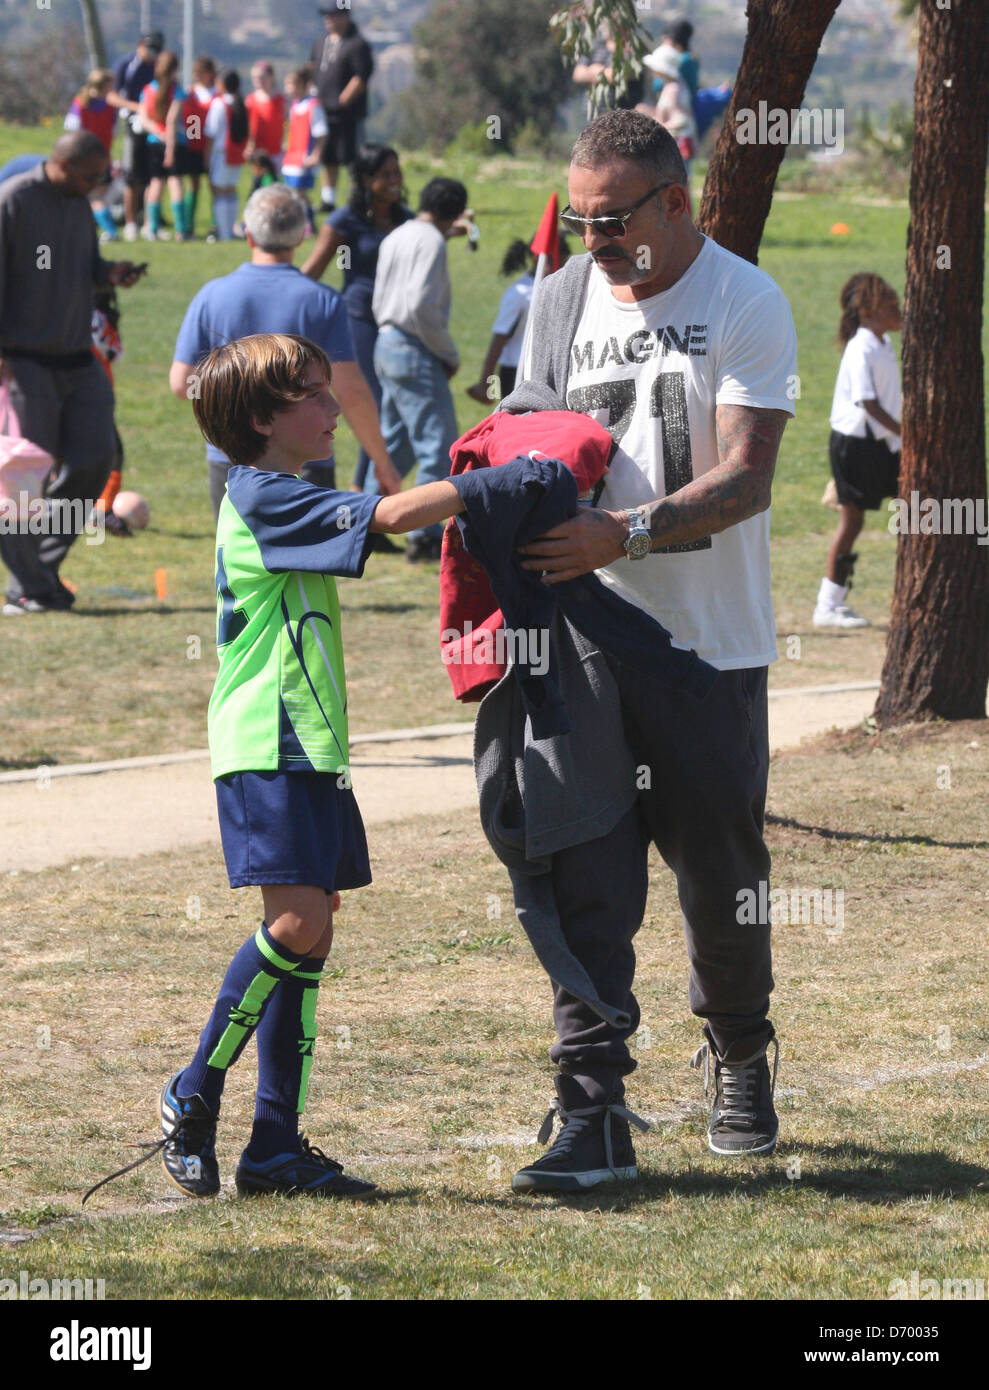 Christian Audigier with his son Dylan after a local soccer game in Los Angeles Los Angeles, California, USA - 03.03.12 Stock Photo